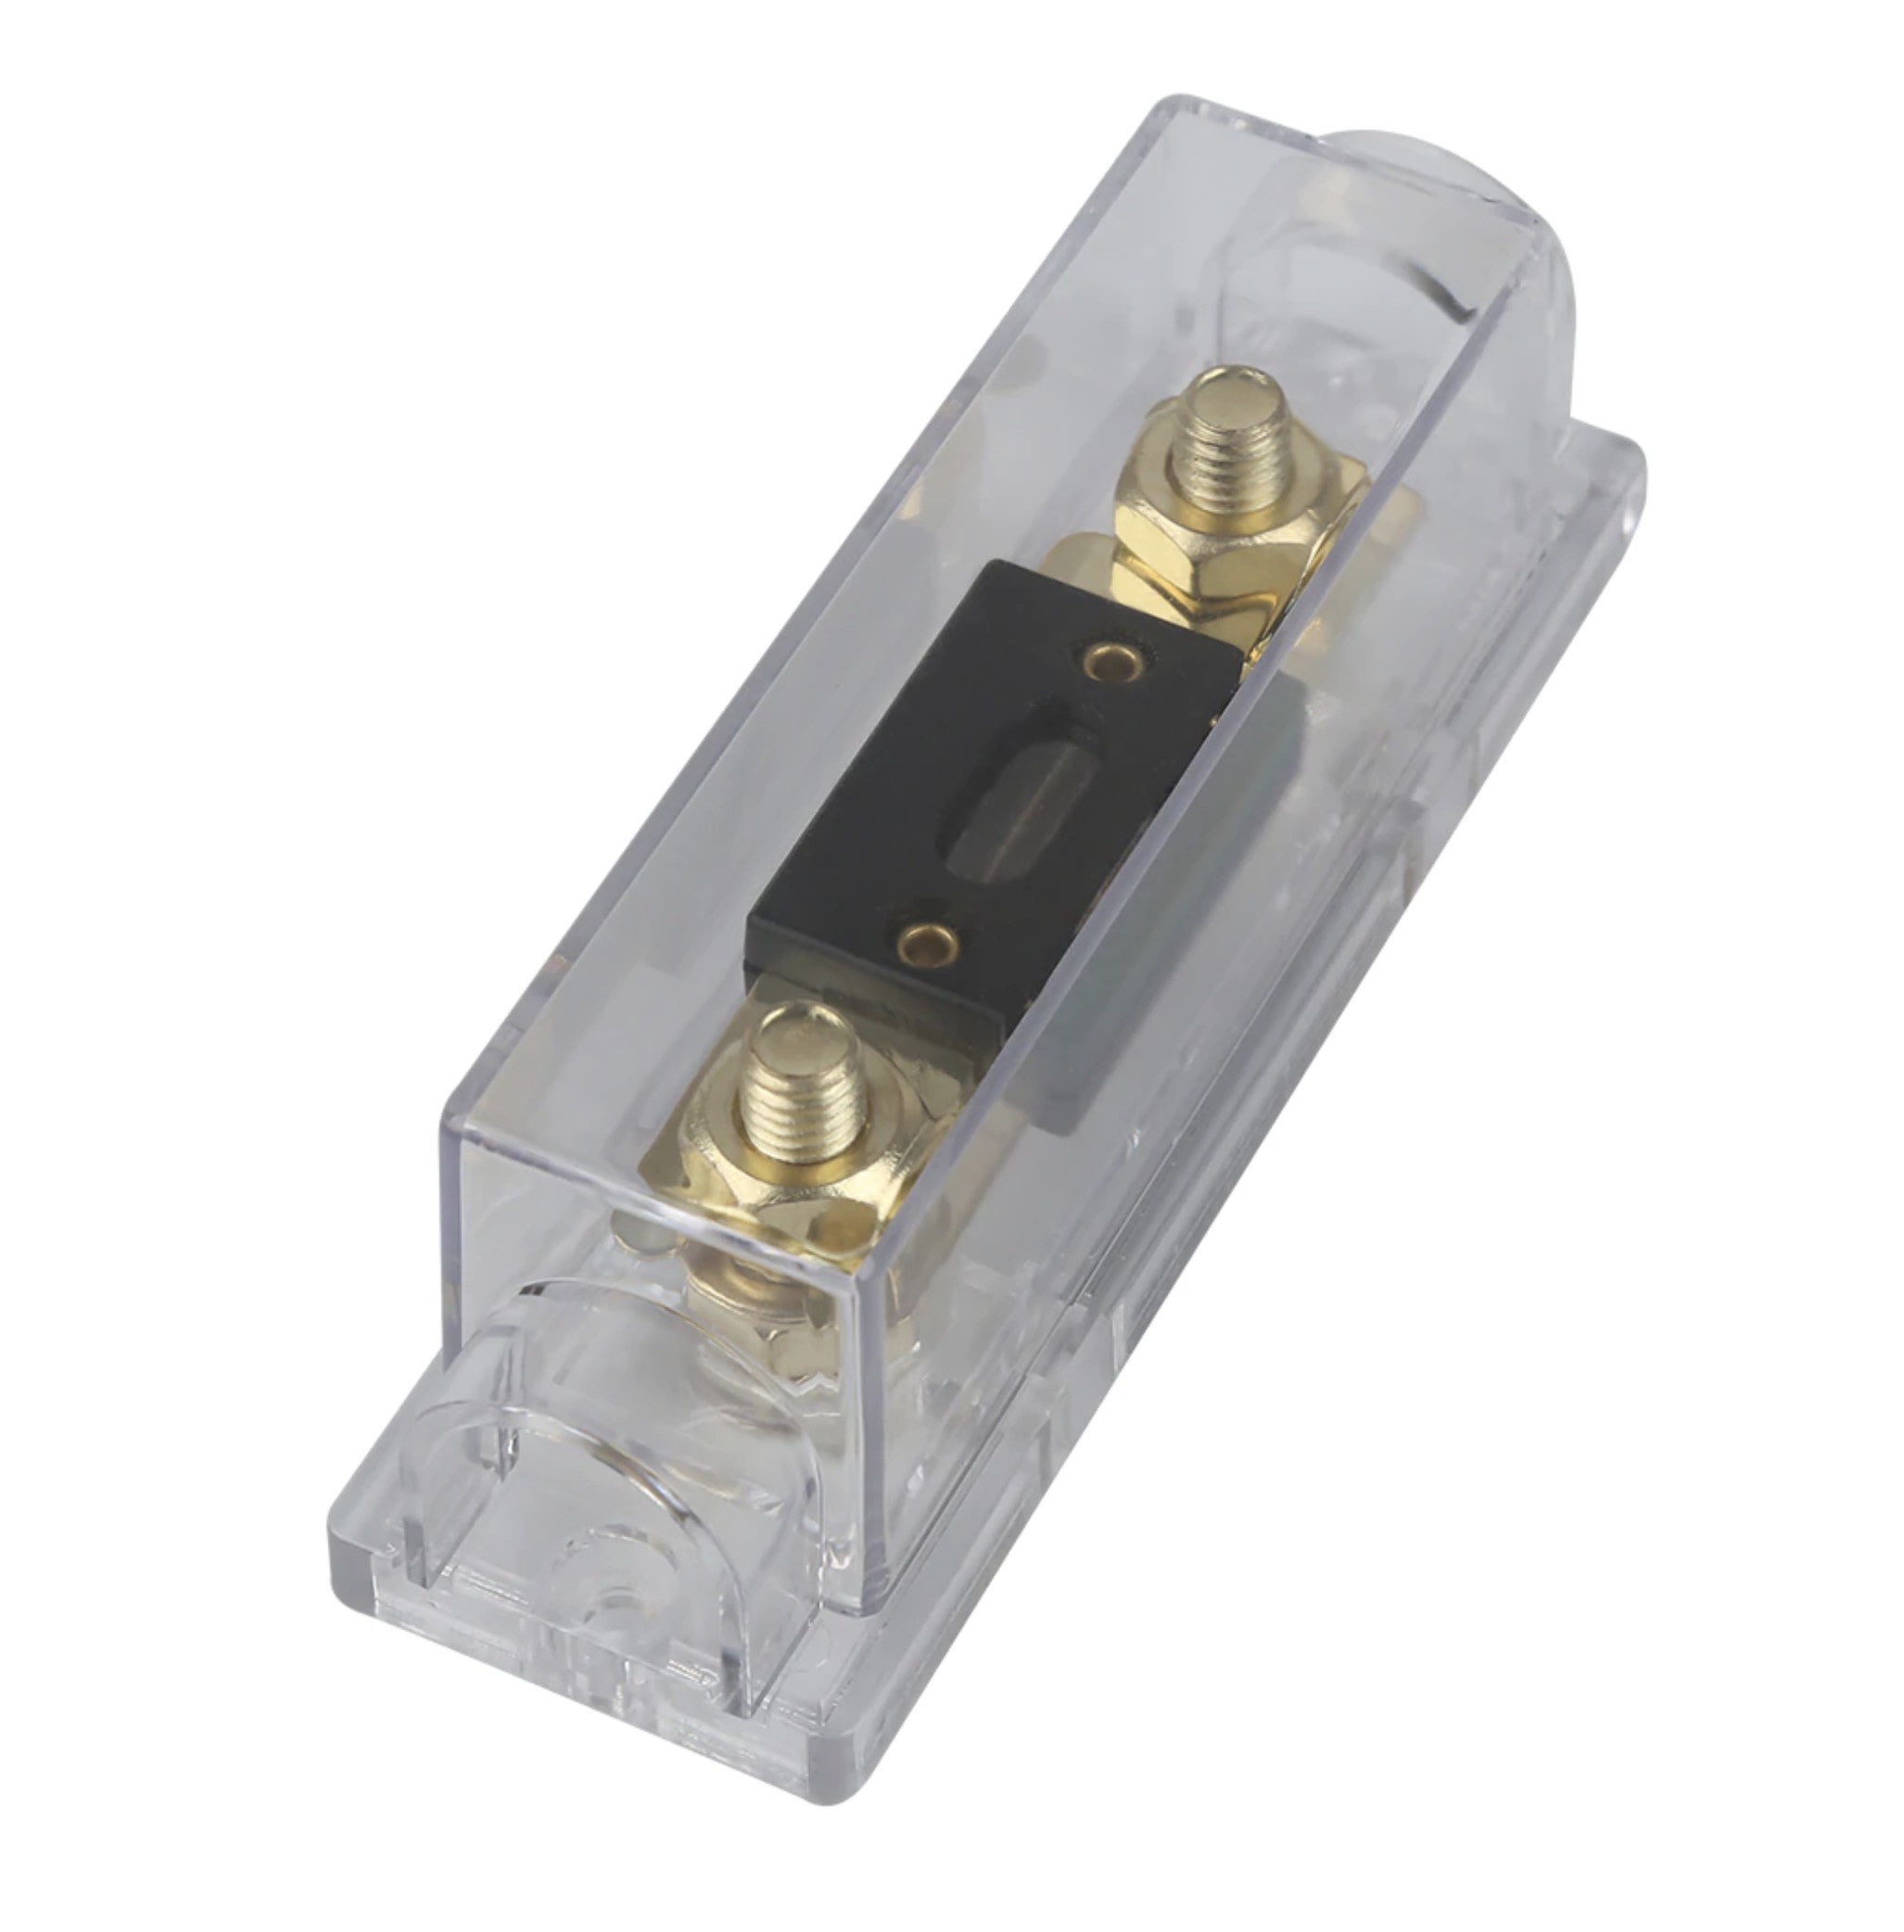 ANL Electrical Protection Fuse Holder